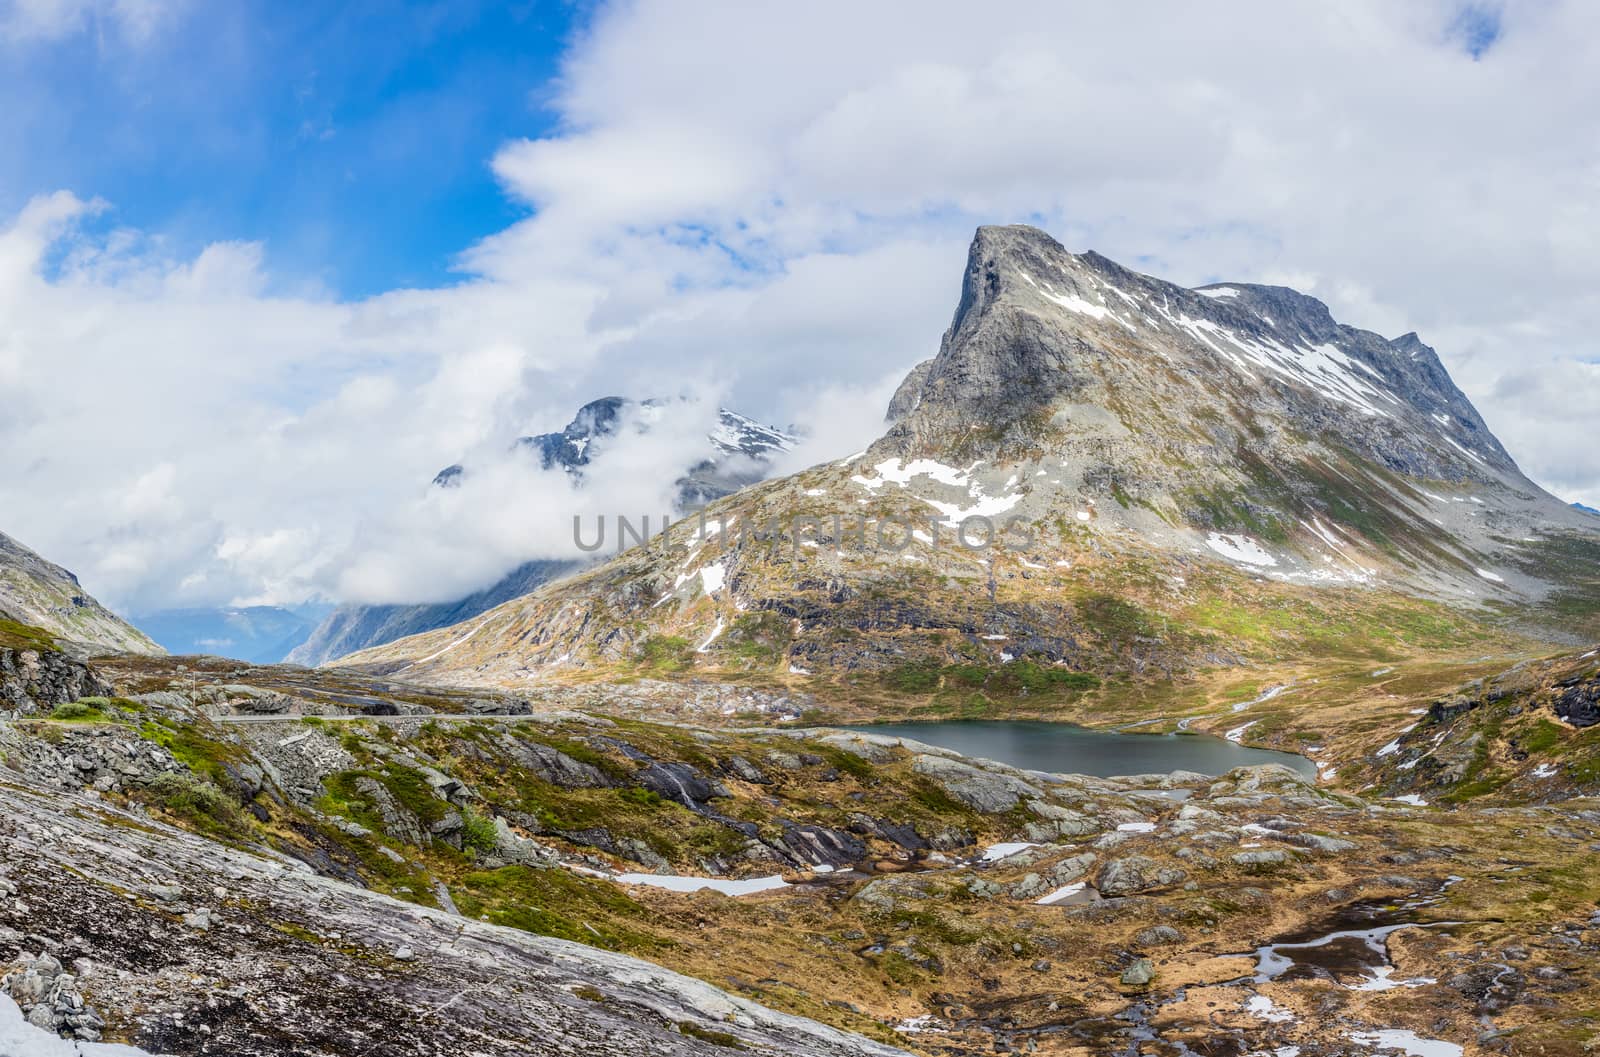 Passage in the mountains with snowy peaks around Alnesvatnet lak by ambeon